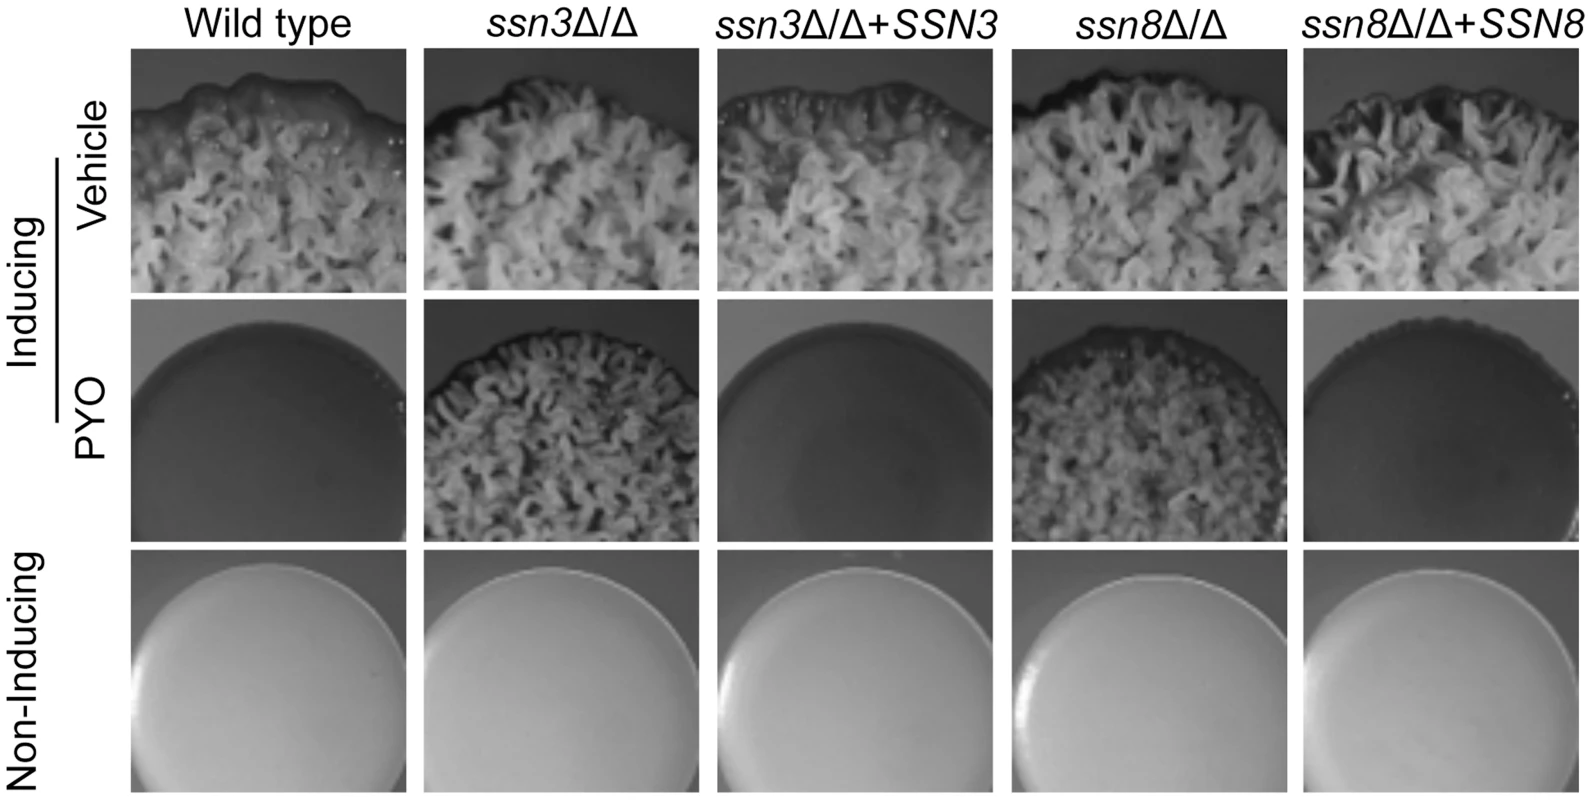 Genetic screen revealed that <i>ssn3</i> and <i>ssn8</i> mutants maintain wrinkling in the presence of PYO.